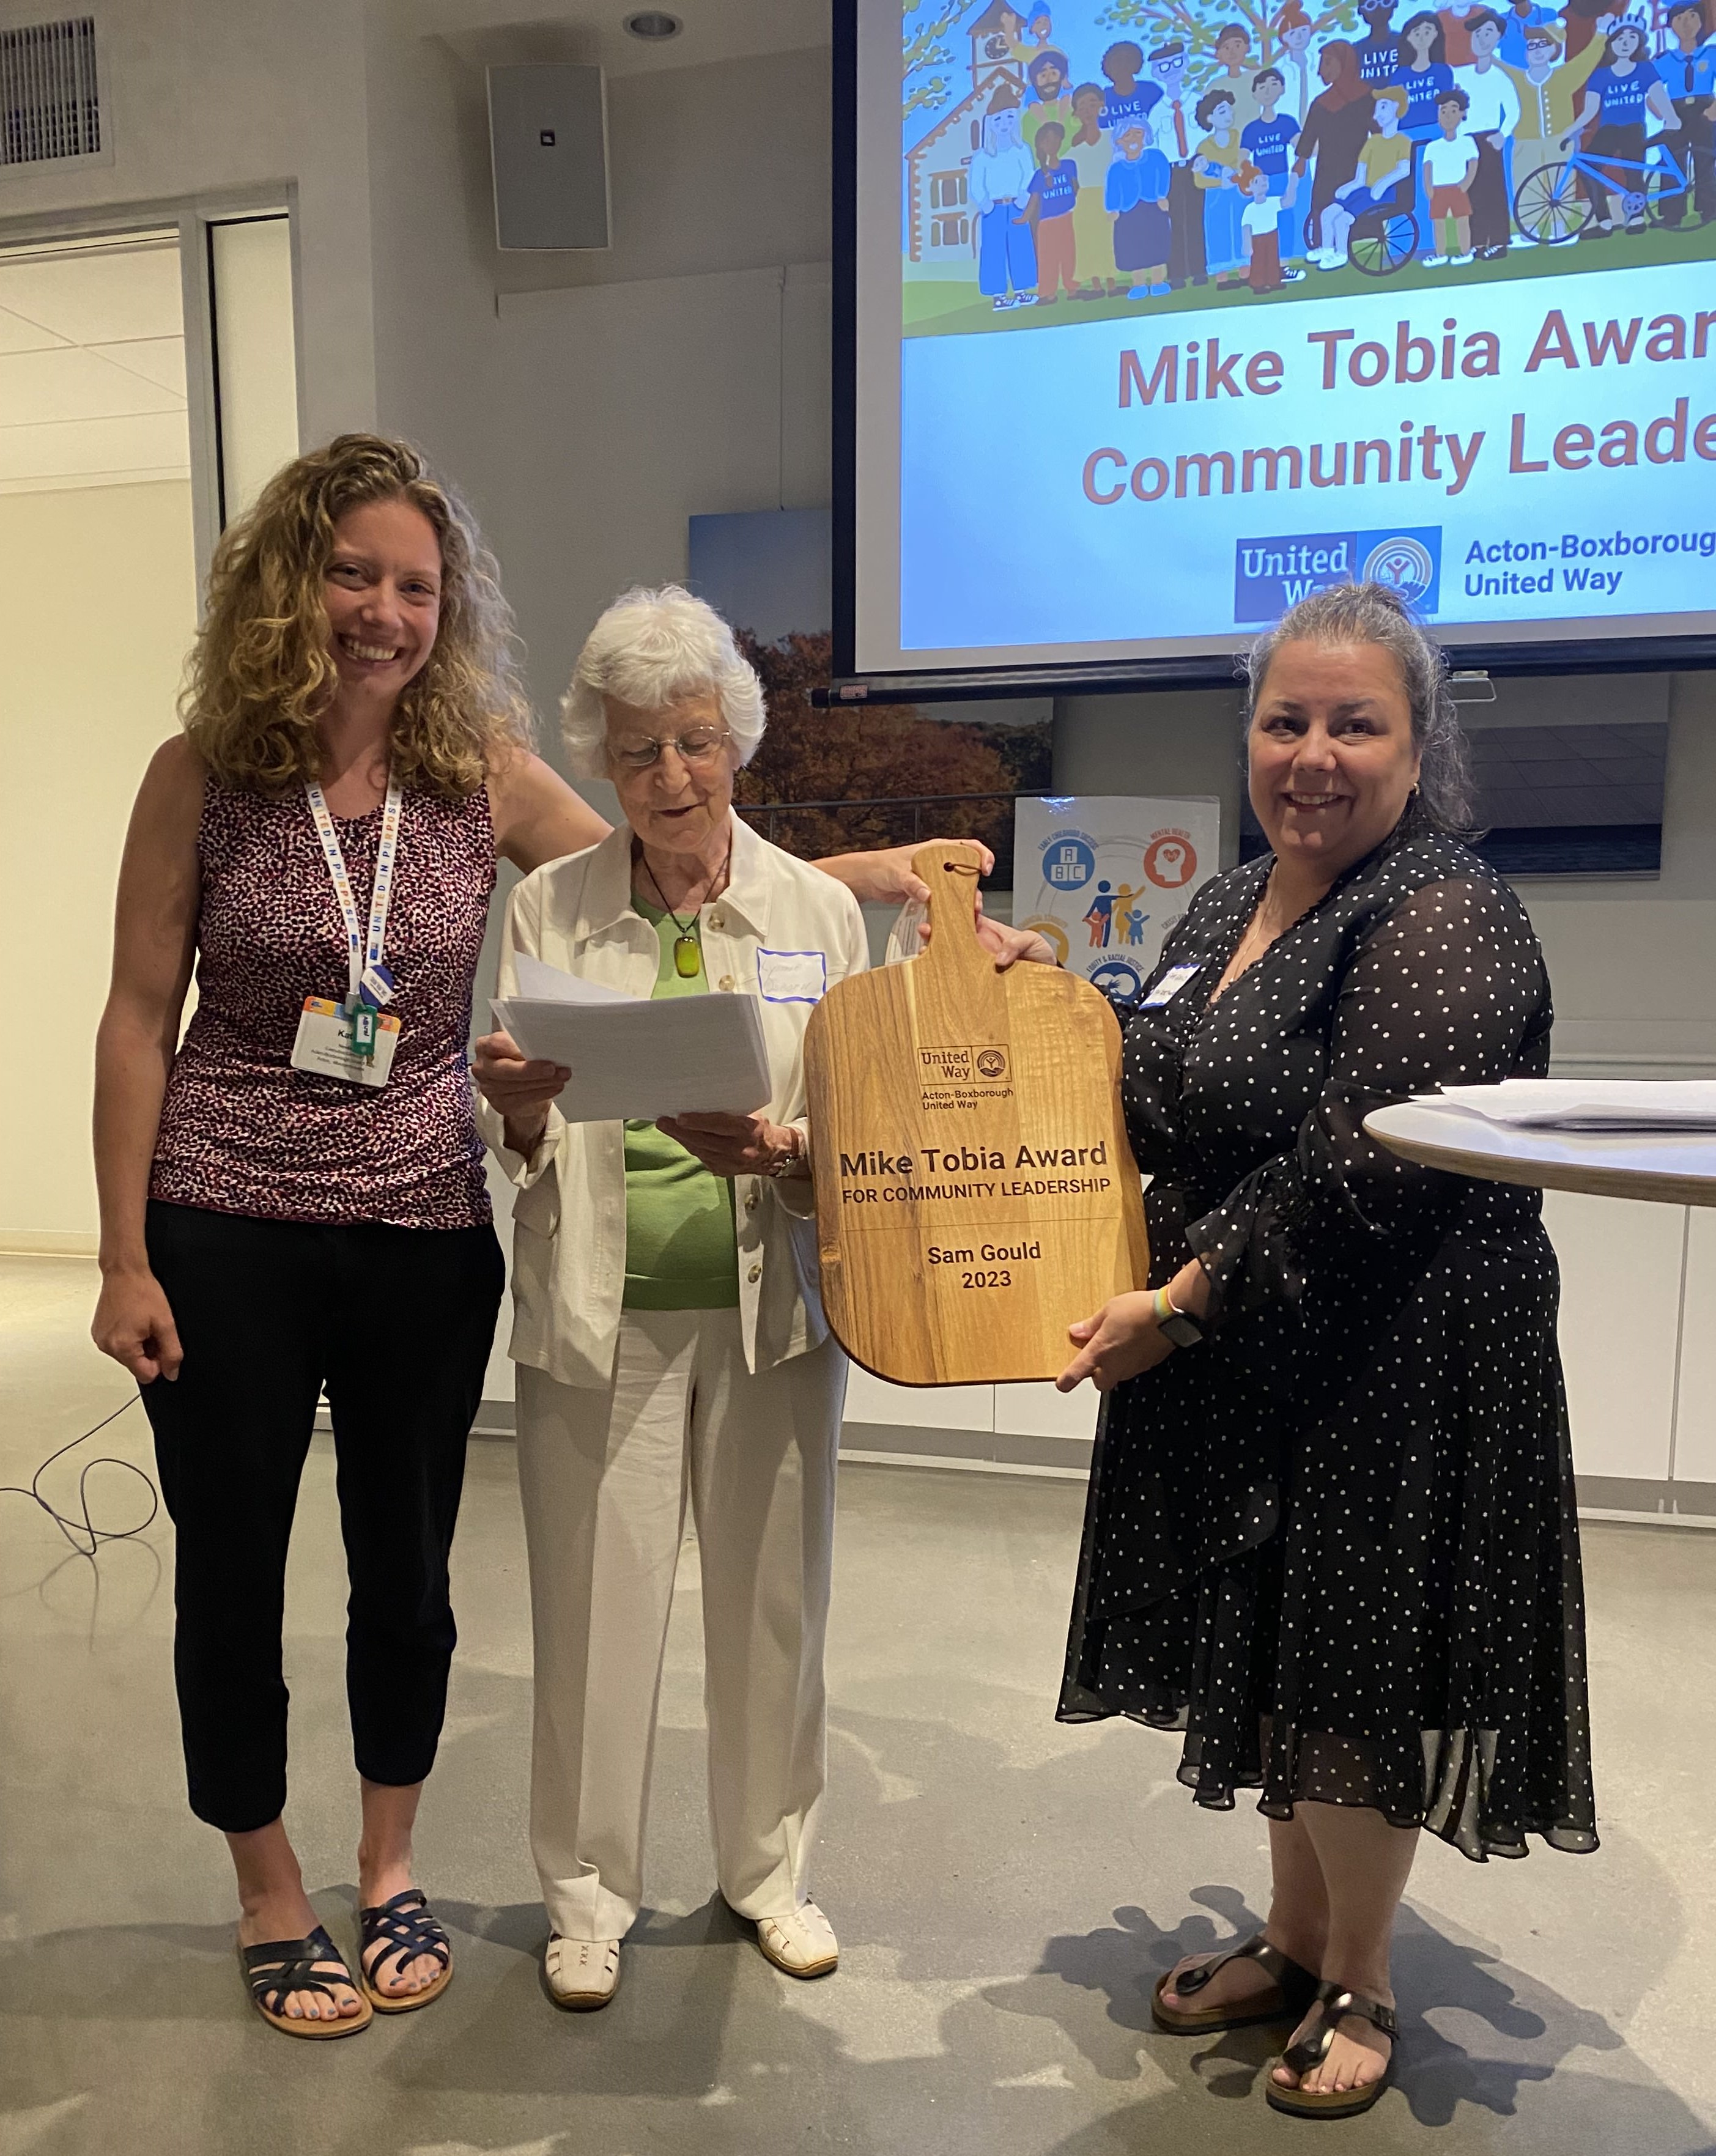 ABUW Executive Director Katie Neville and 2022 Award Recipient Lynne Osborn present Sam Gould with Mike Tobia Award